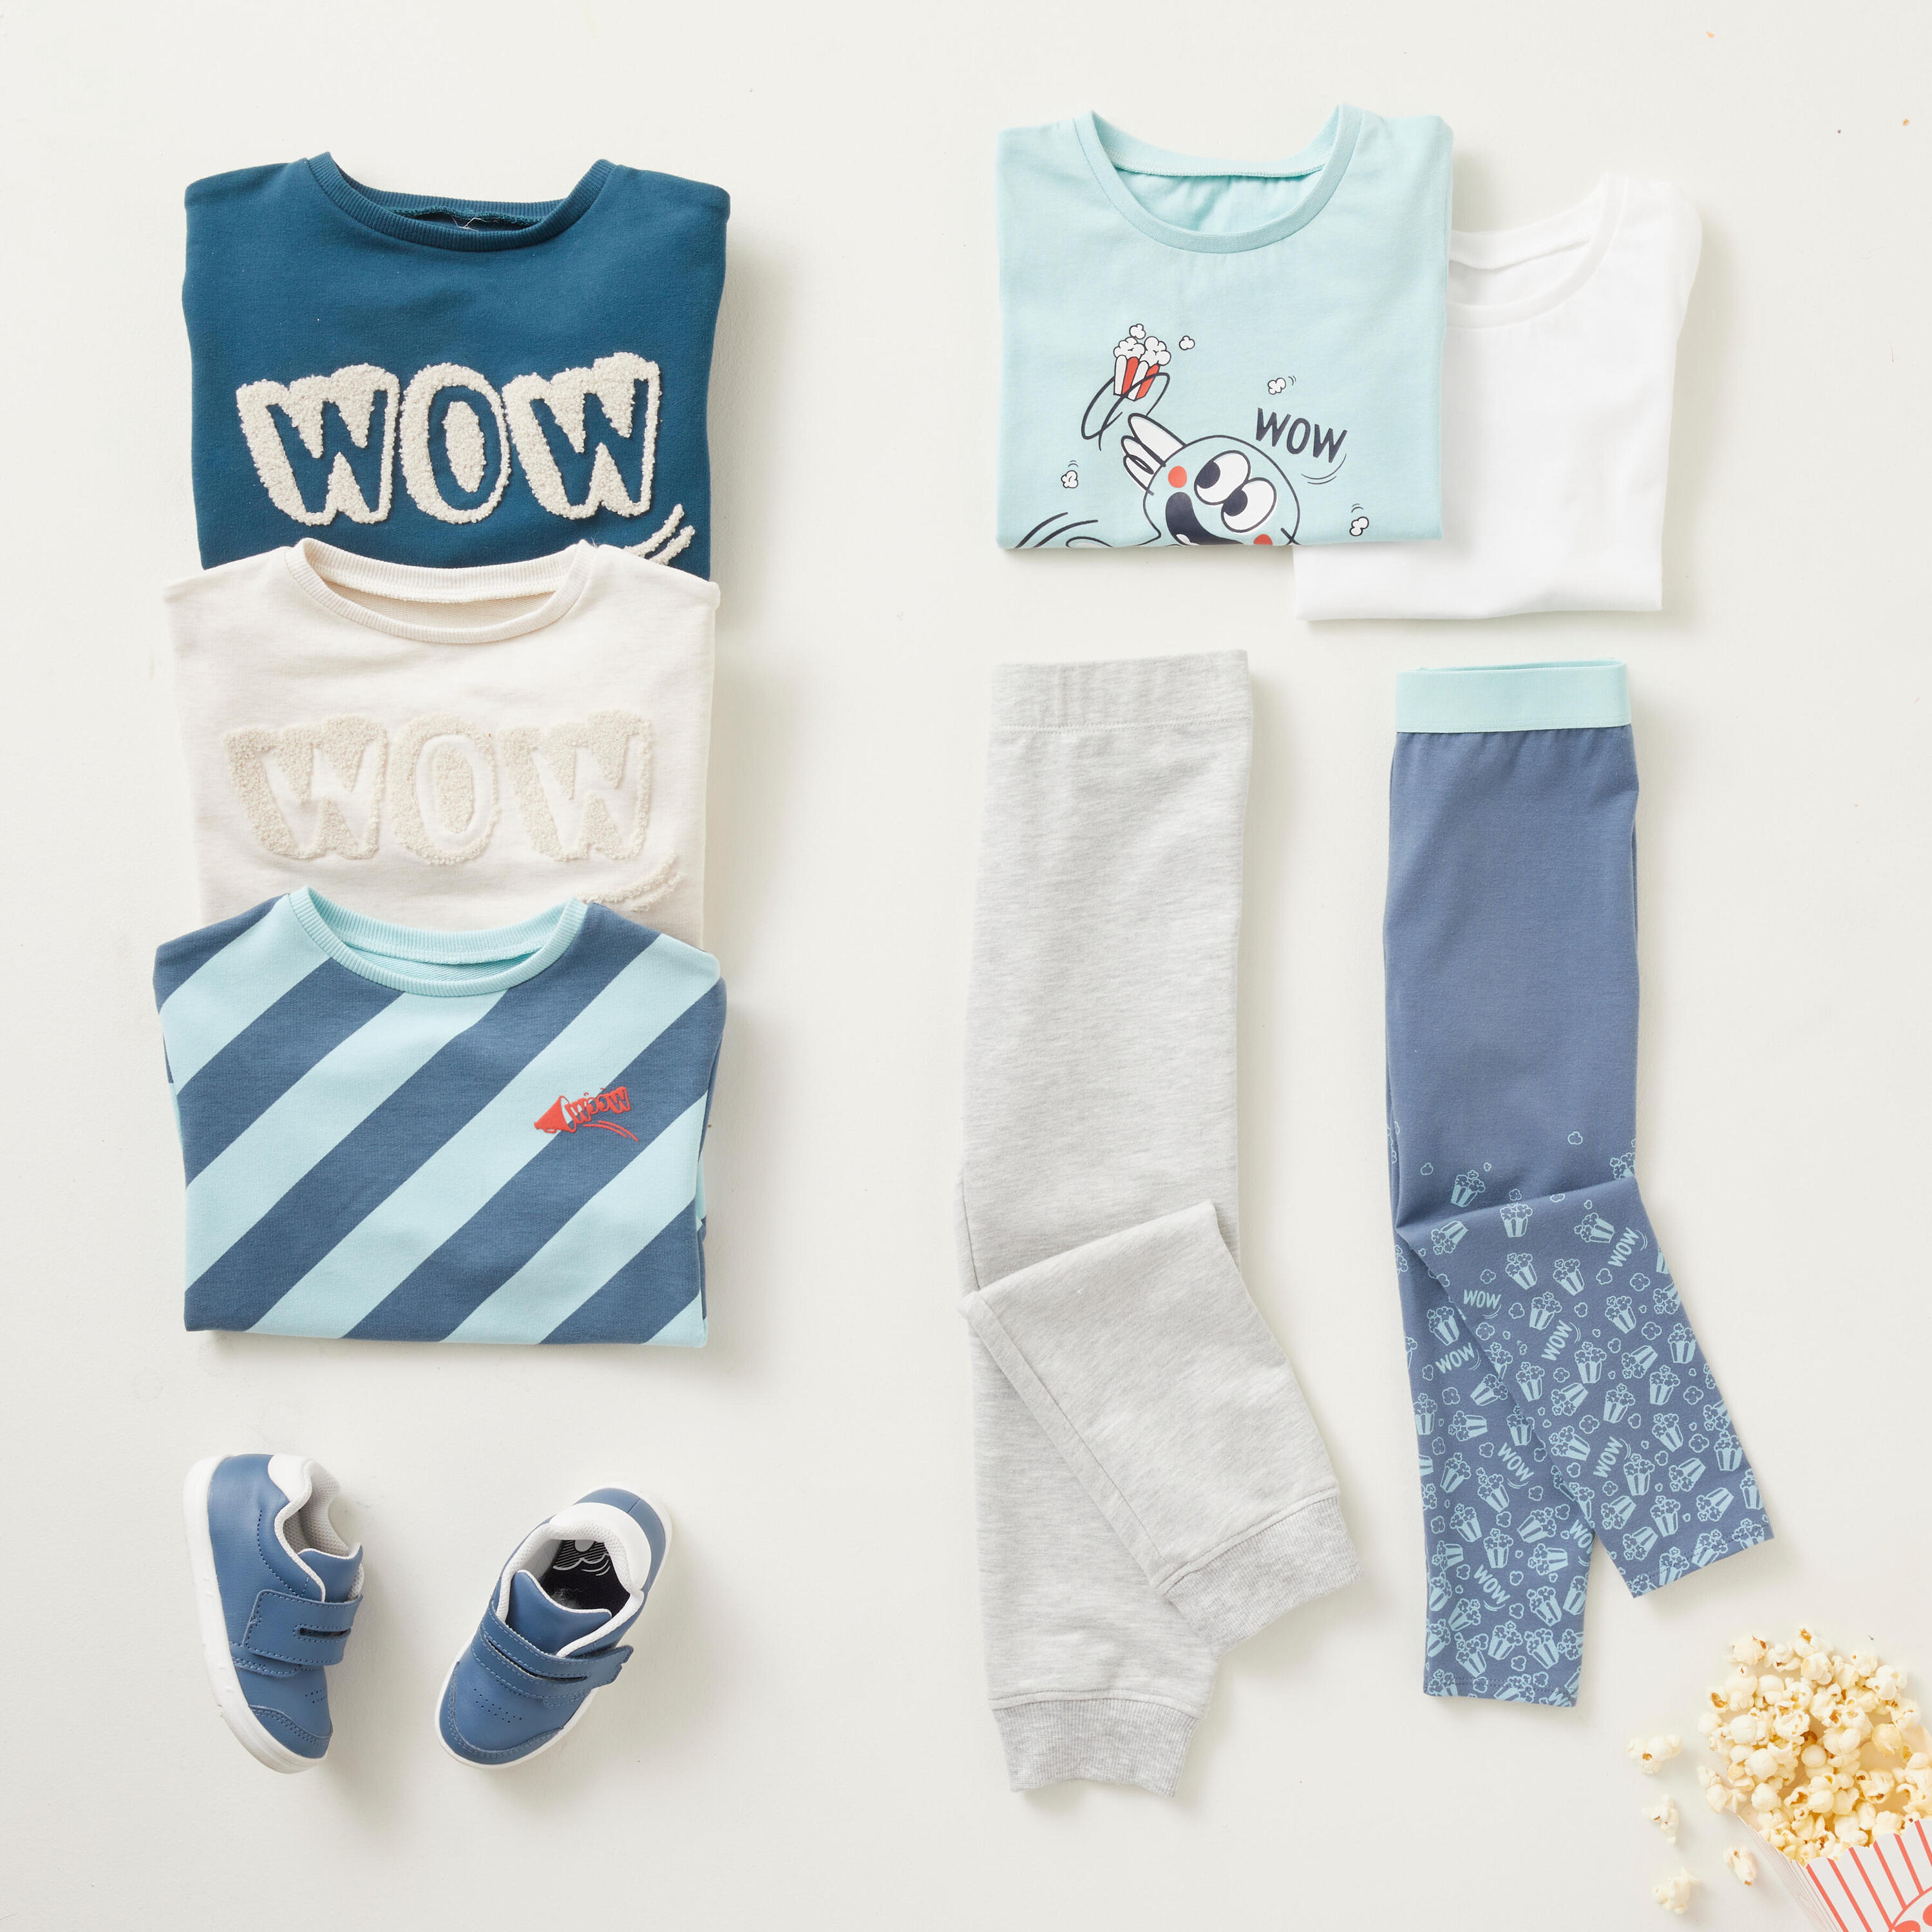 DOMYOS Kids' Cotton T-Shirt Basic - Turquoise with Print